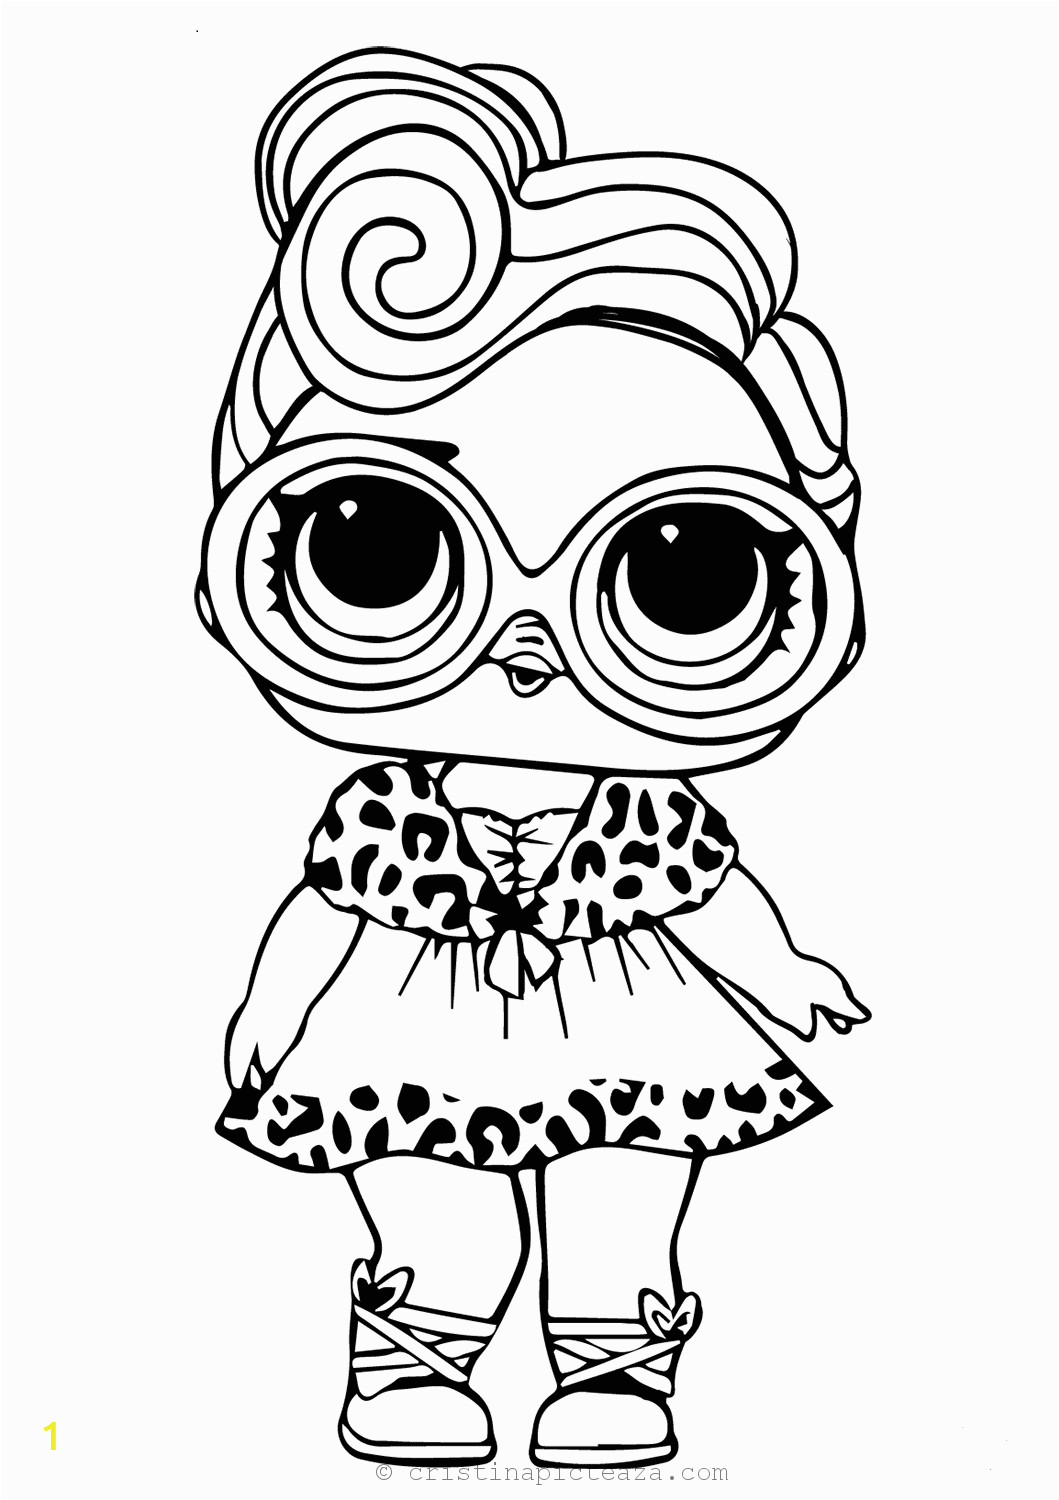 Lol Doll Coloring Pages Printable Free Lol Coloring Pages Lol Dolls for Coloring and Painting